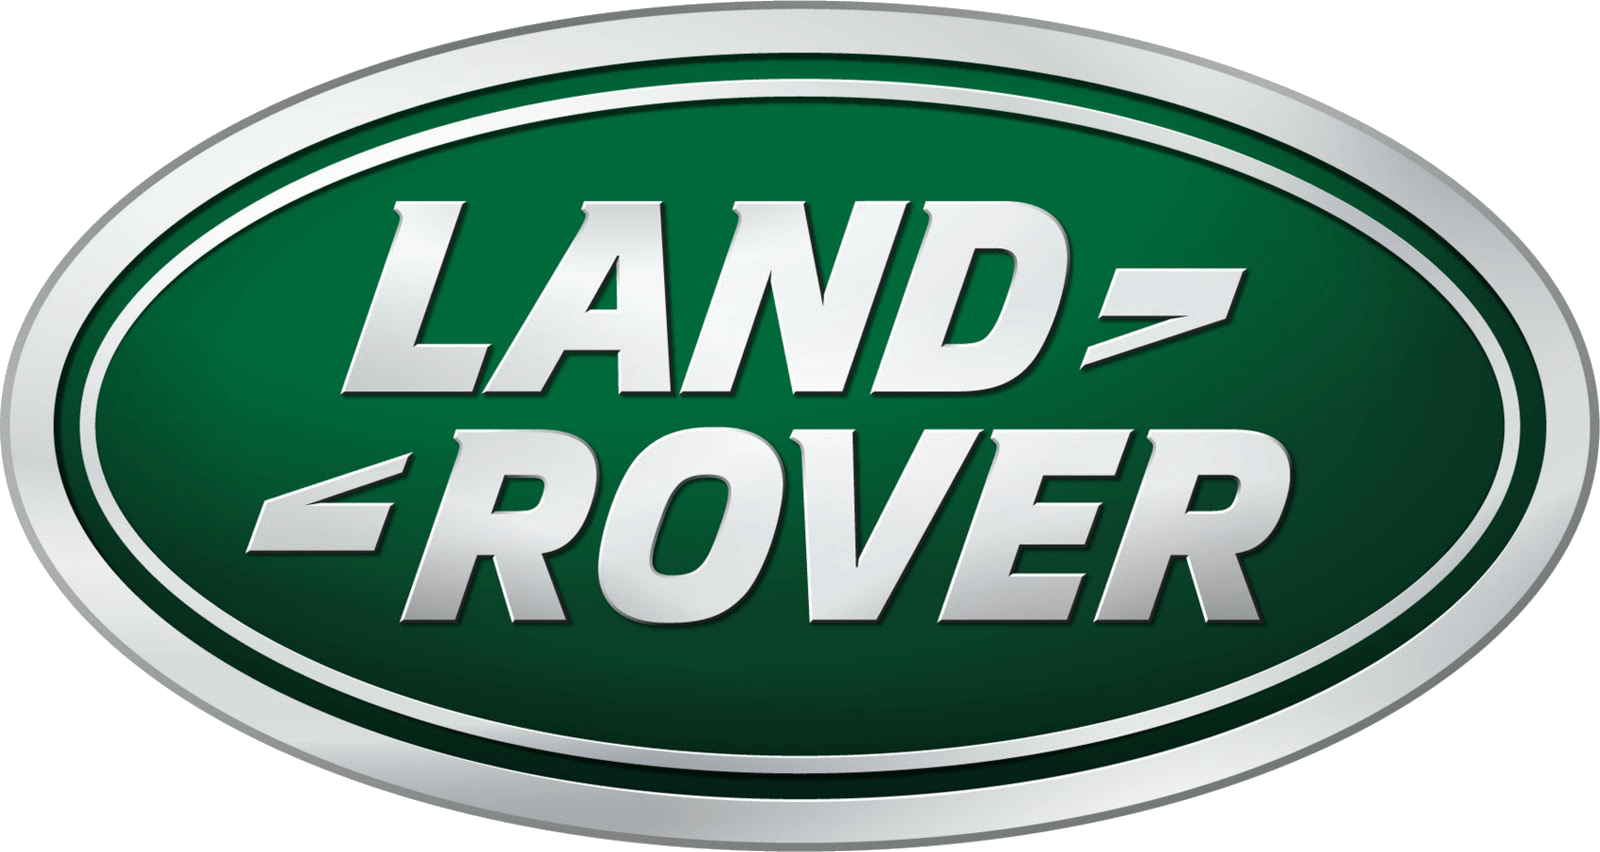 With Green Circle Brand Logo - Land Rover Logo, Land Rover Car Symbol Meaning and History | Car ...